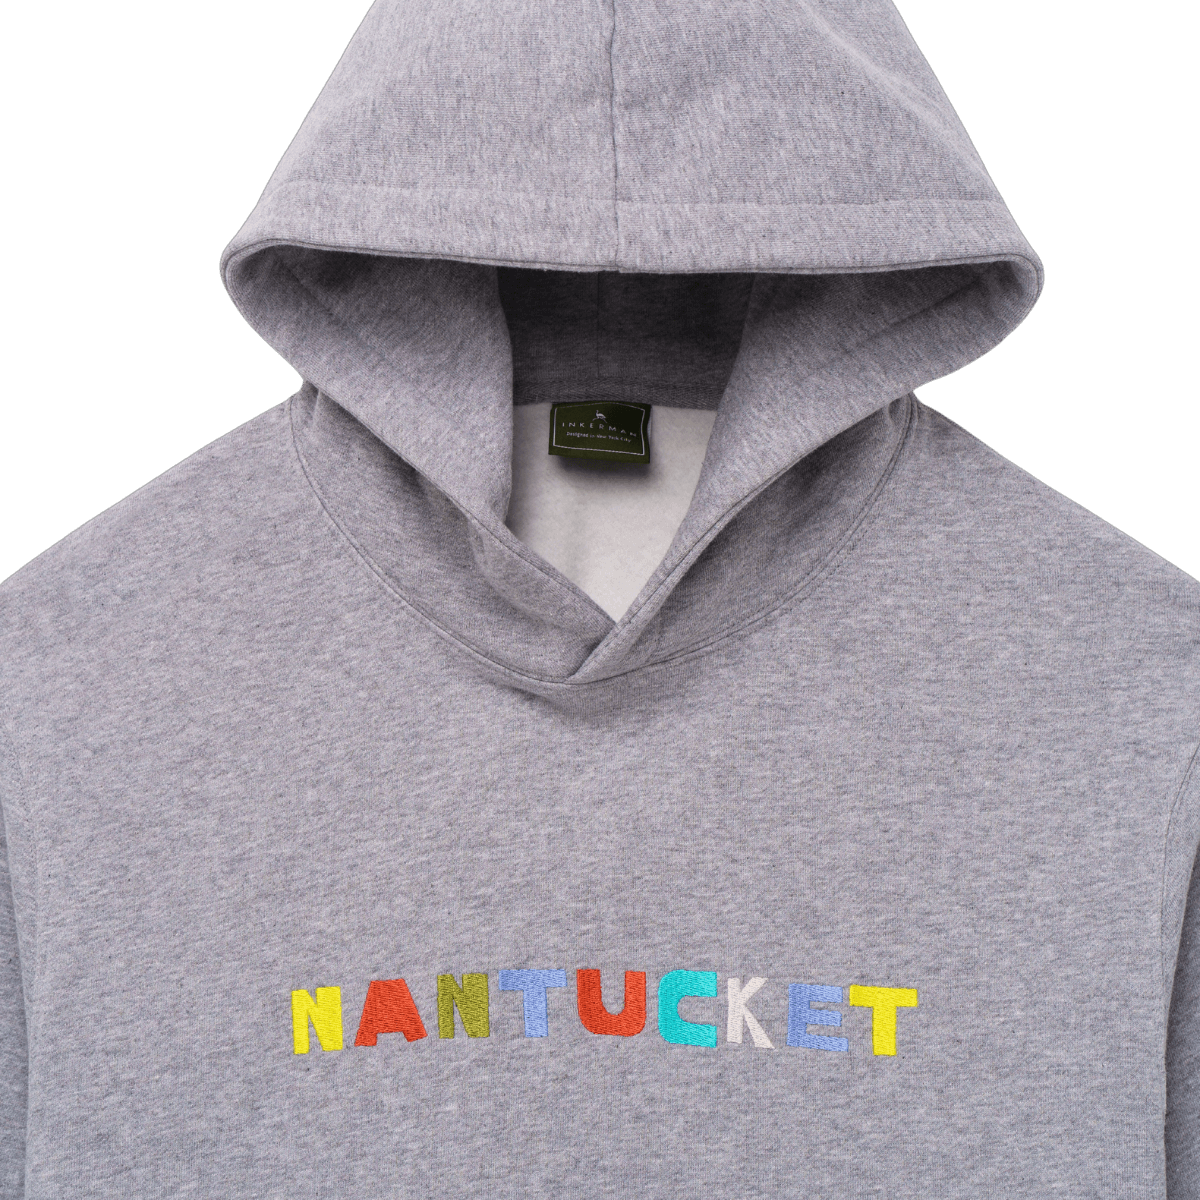 Nantucket Embroidered Hoodie